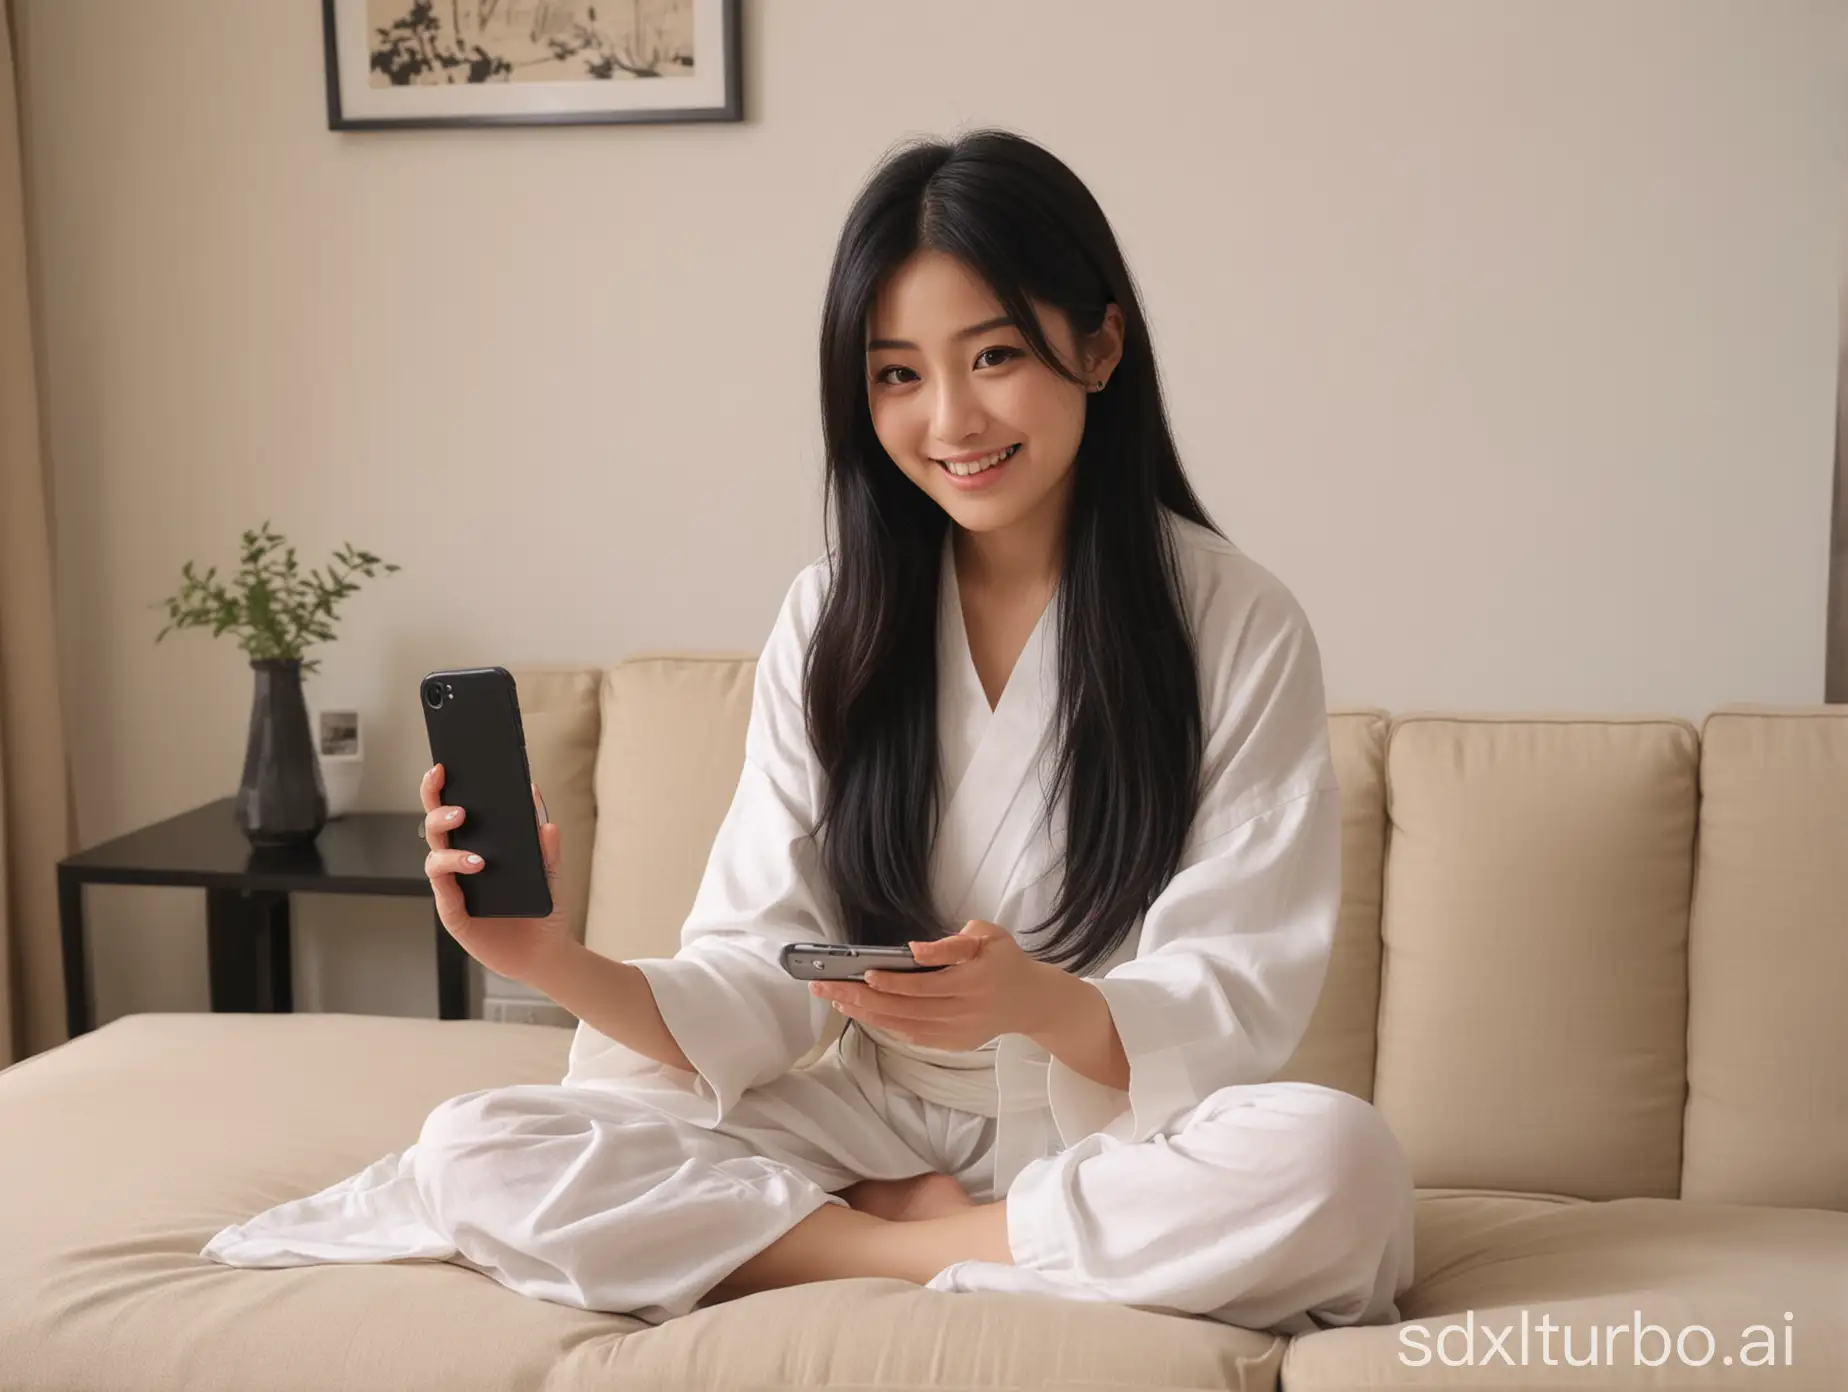 beautiful intellectual typical Japanese 33-year-old girl is playing one iPhone, living-room setting, Instagram model, long black hair, black eyes, height 6.5 feets, female, masterpiece, 4k, correct fingers or hands, smiling